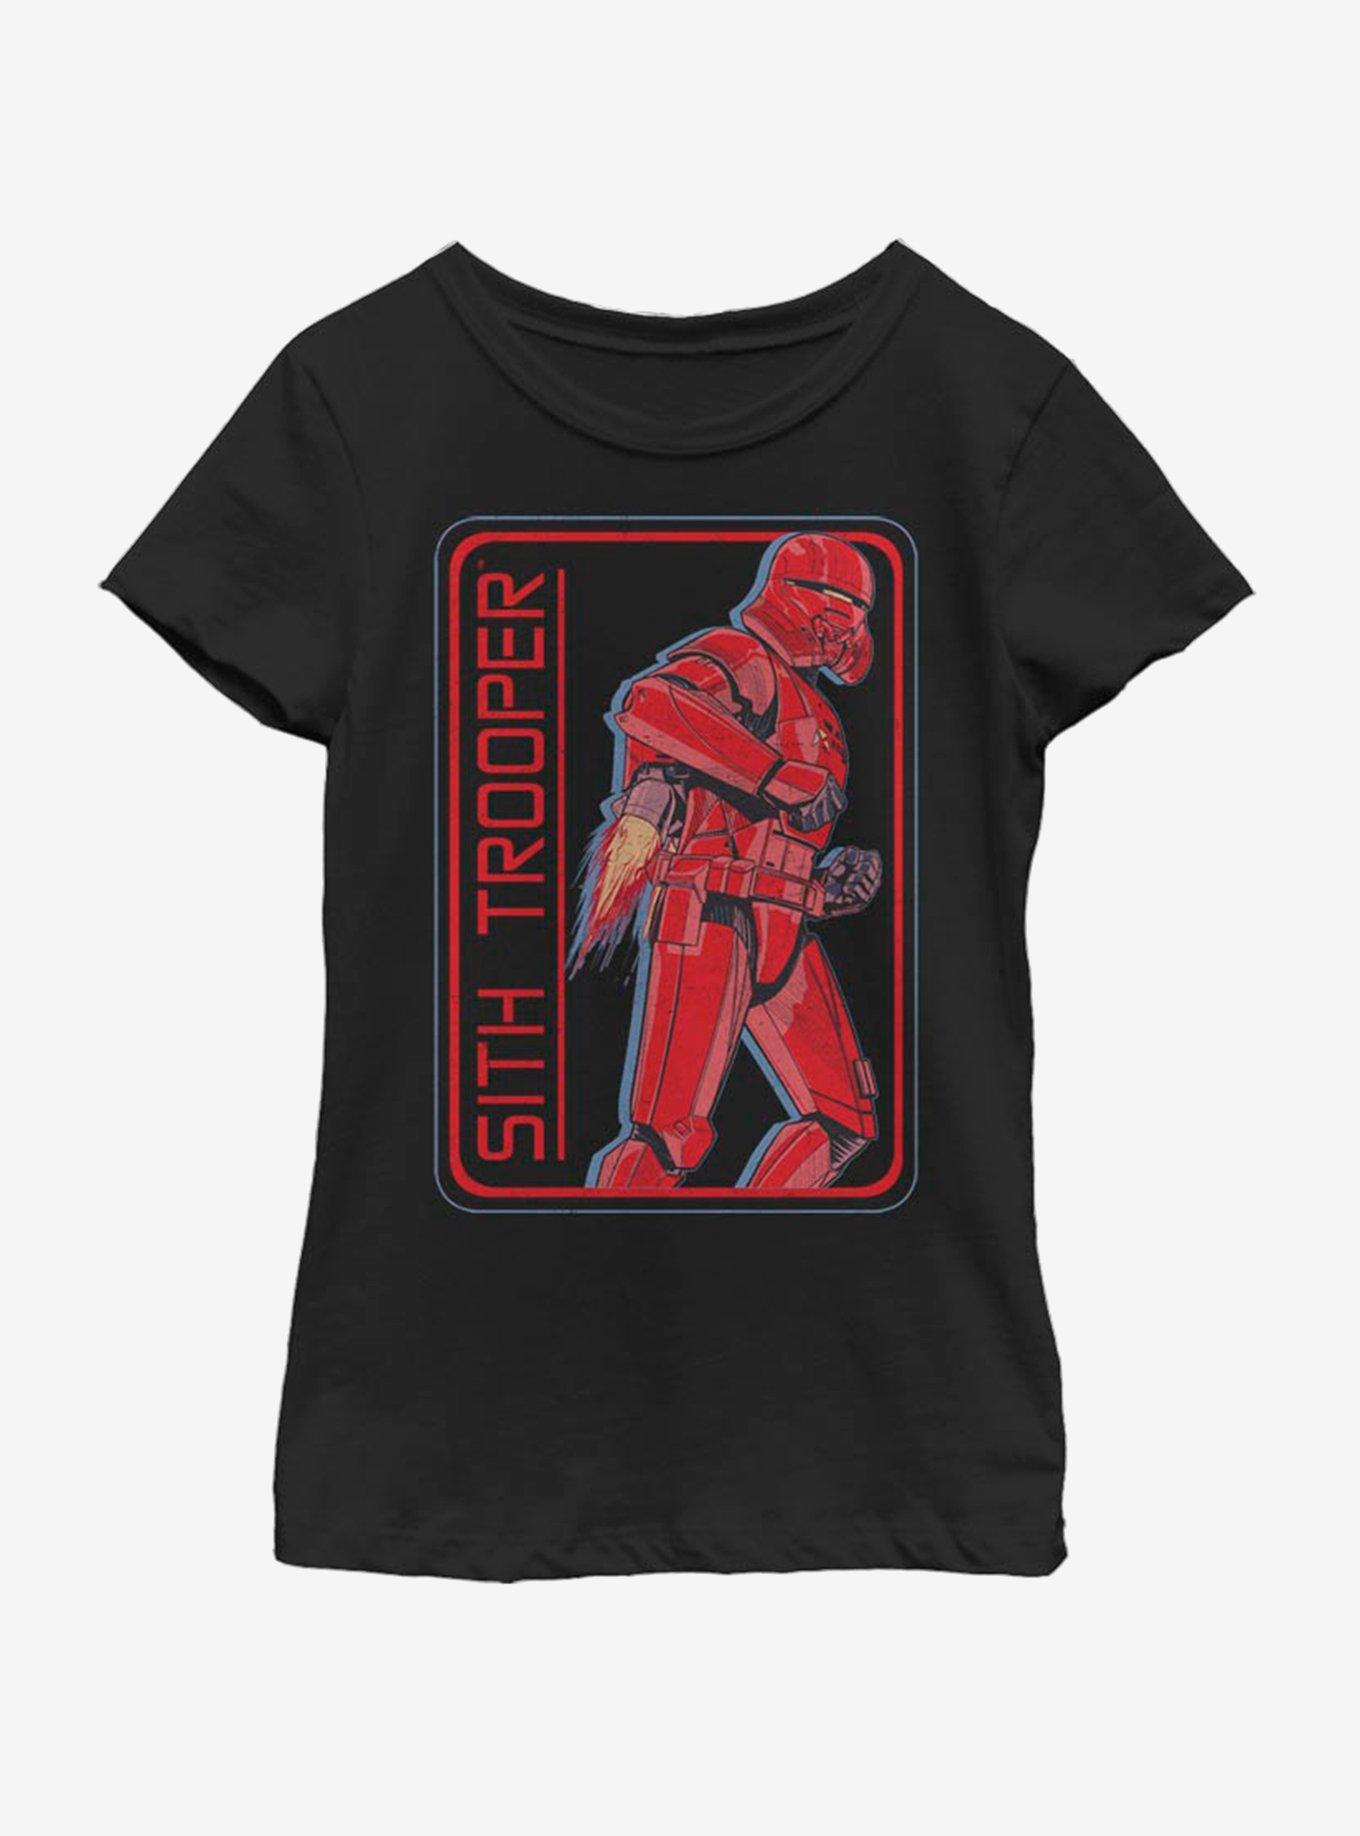 Star Wars The Rise Of Skywalker Retro Sith Trooper Youth Girls T-Shirt, , hi-res